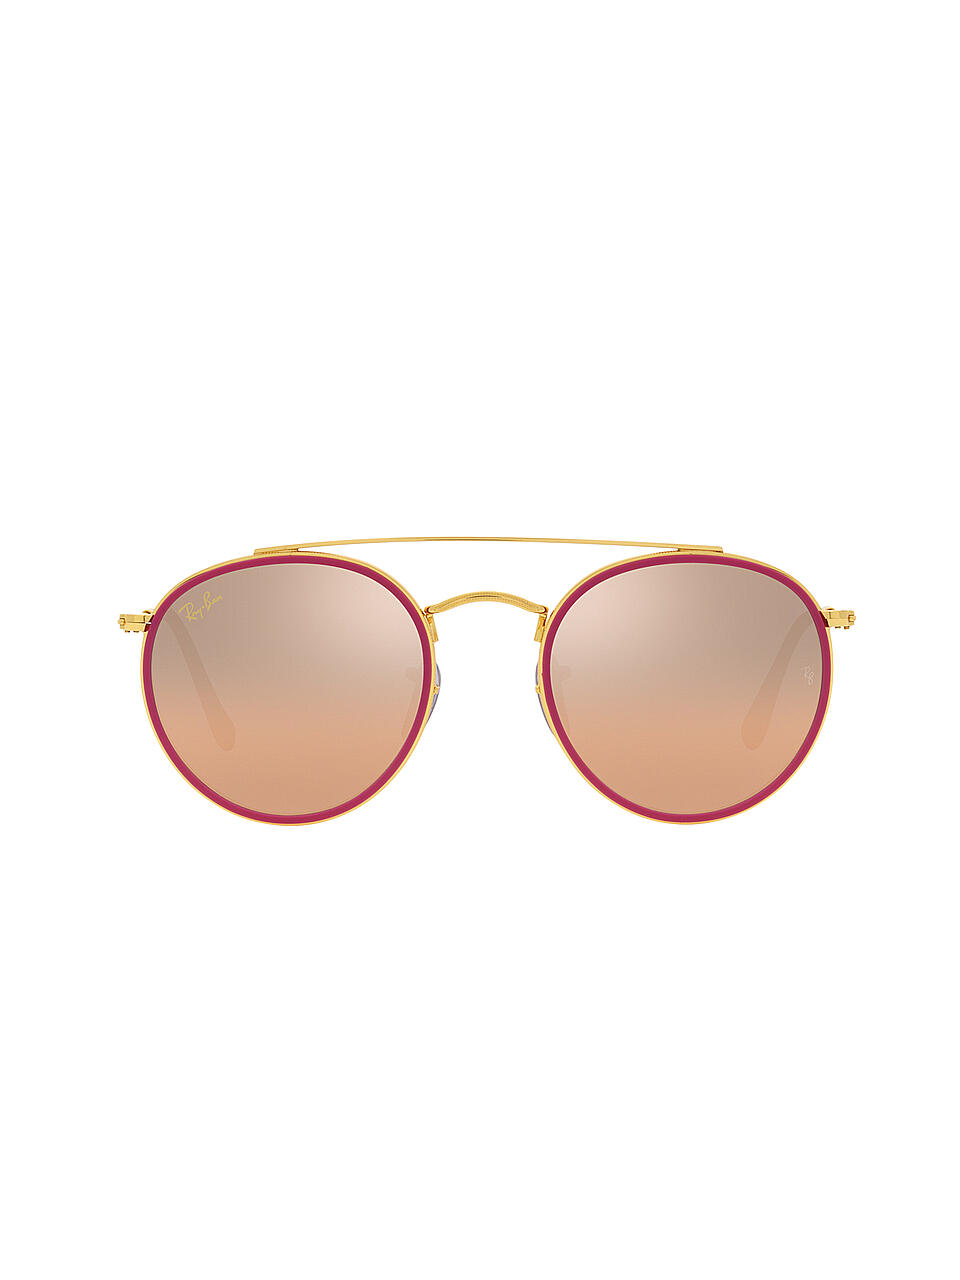 RAY BAN | Sonnenbrille 3647N/51 | pink